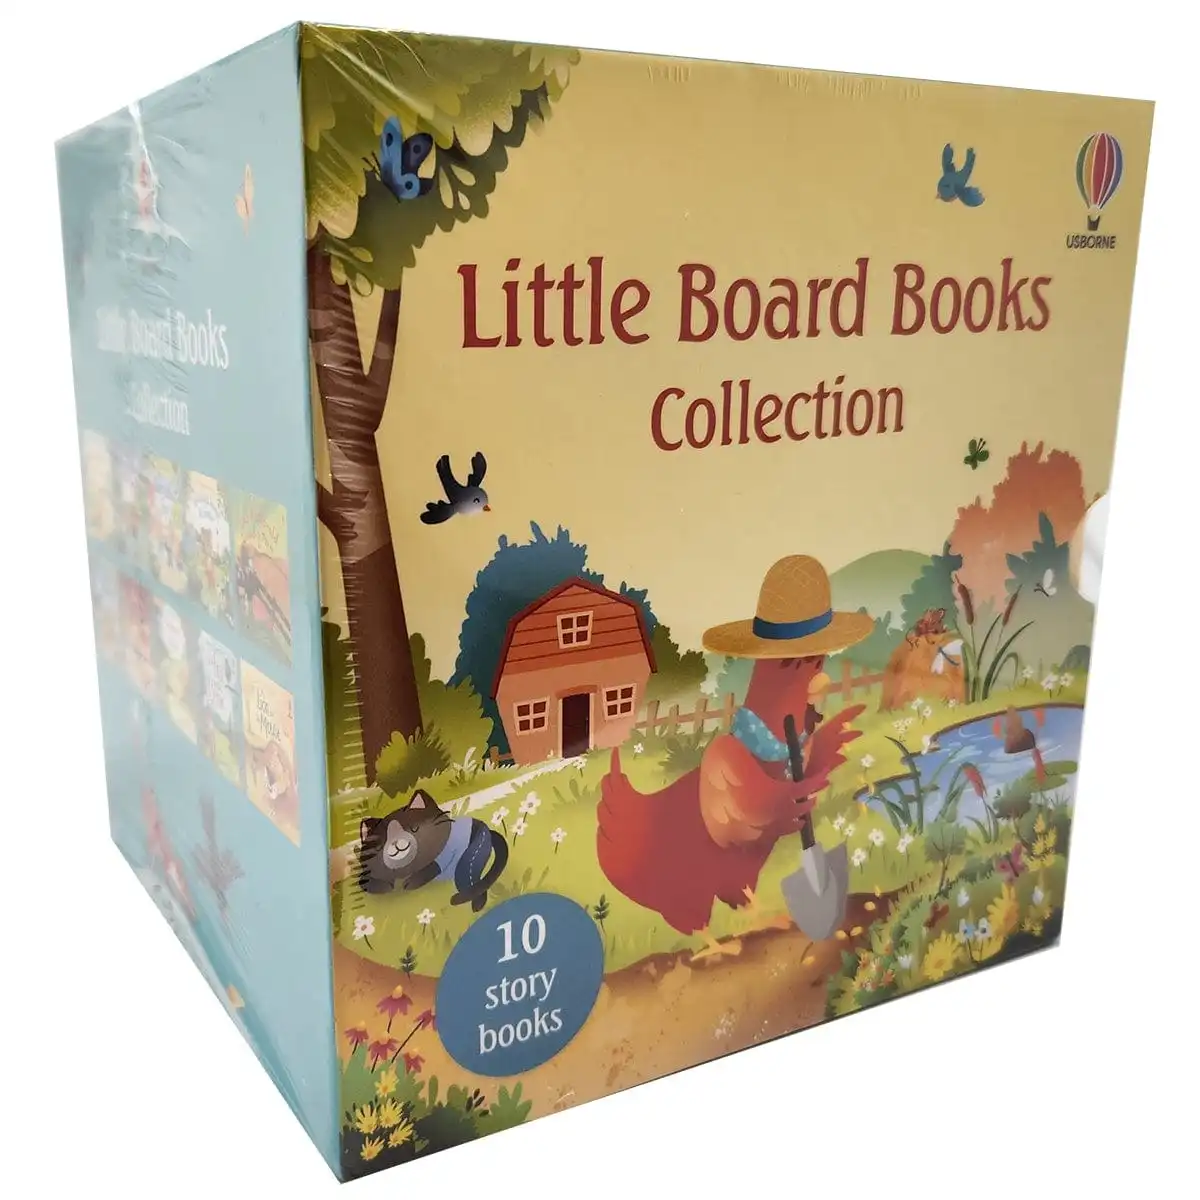 Little Board Book Collection - 10 Copy Box Set